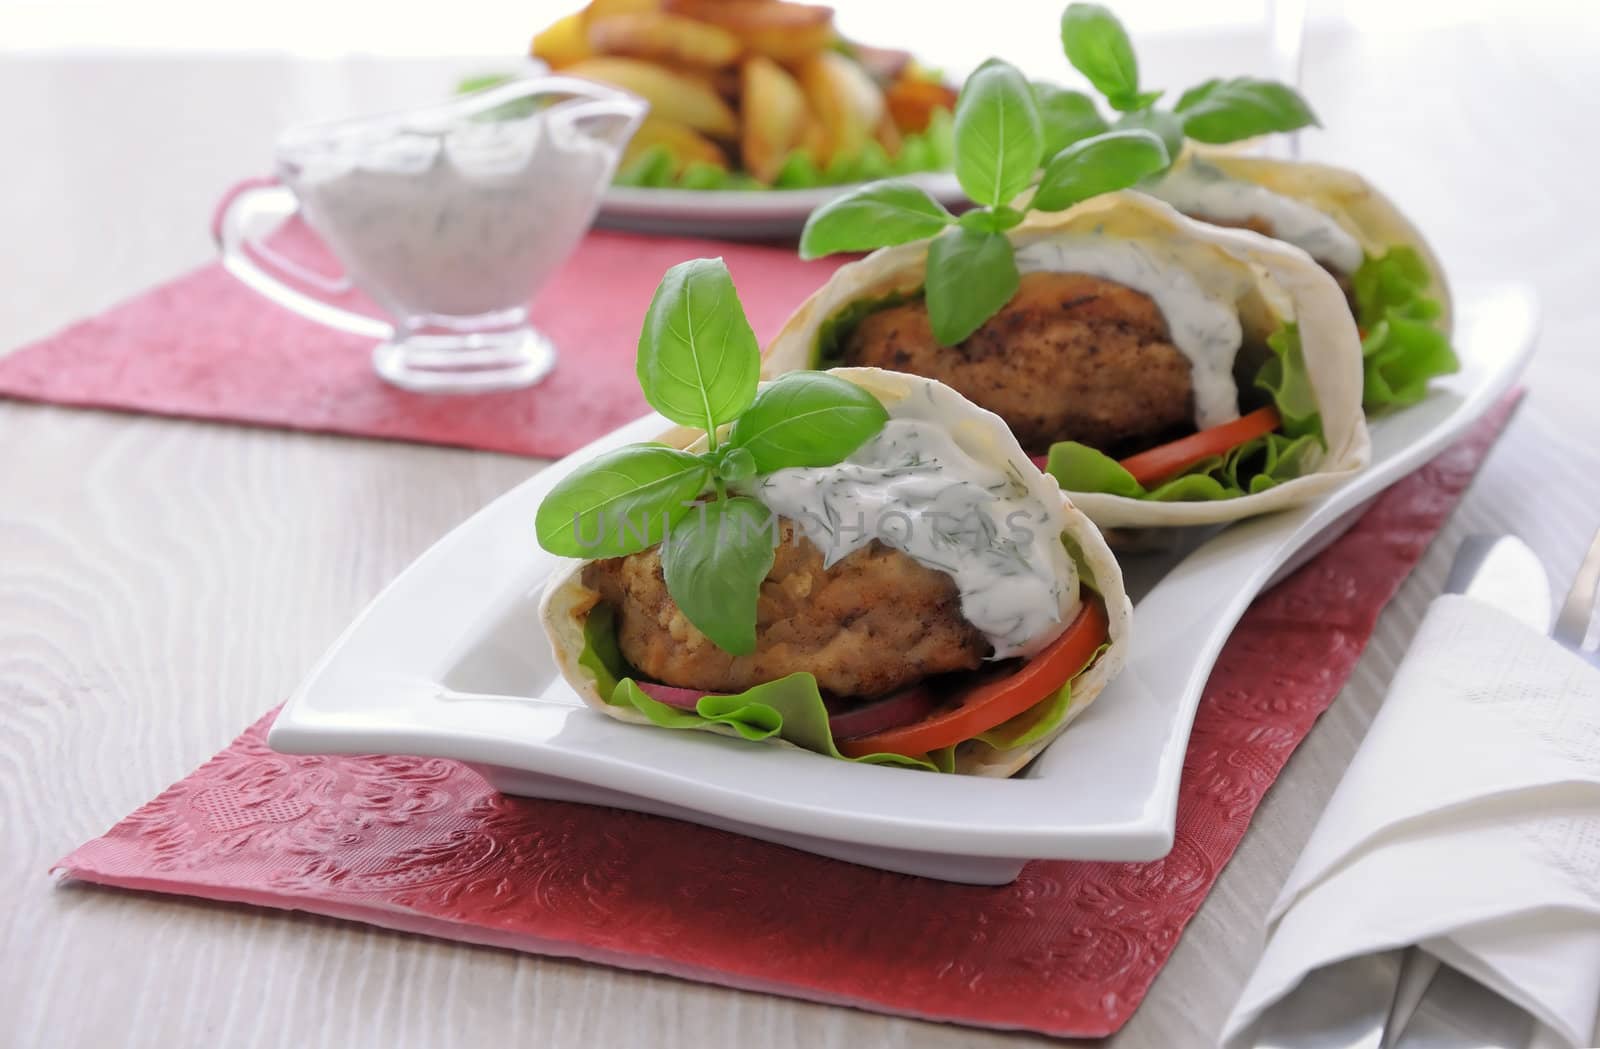 Patty in pita bread with cream sauce and vegetables by Apolonia